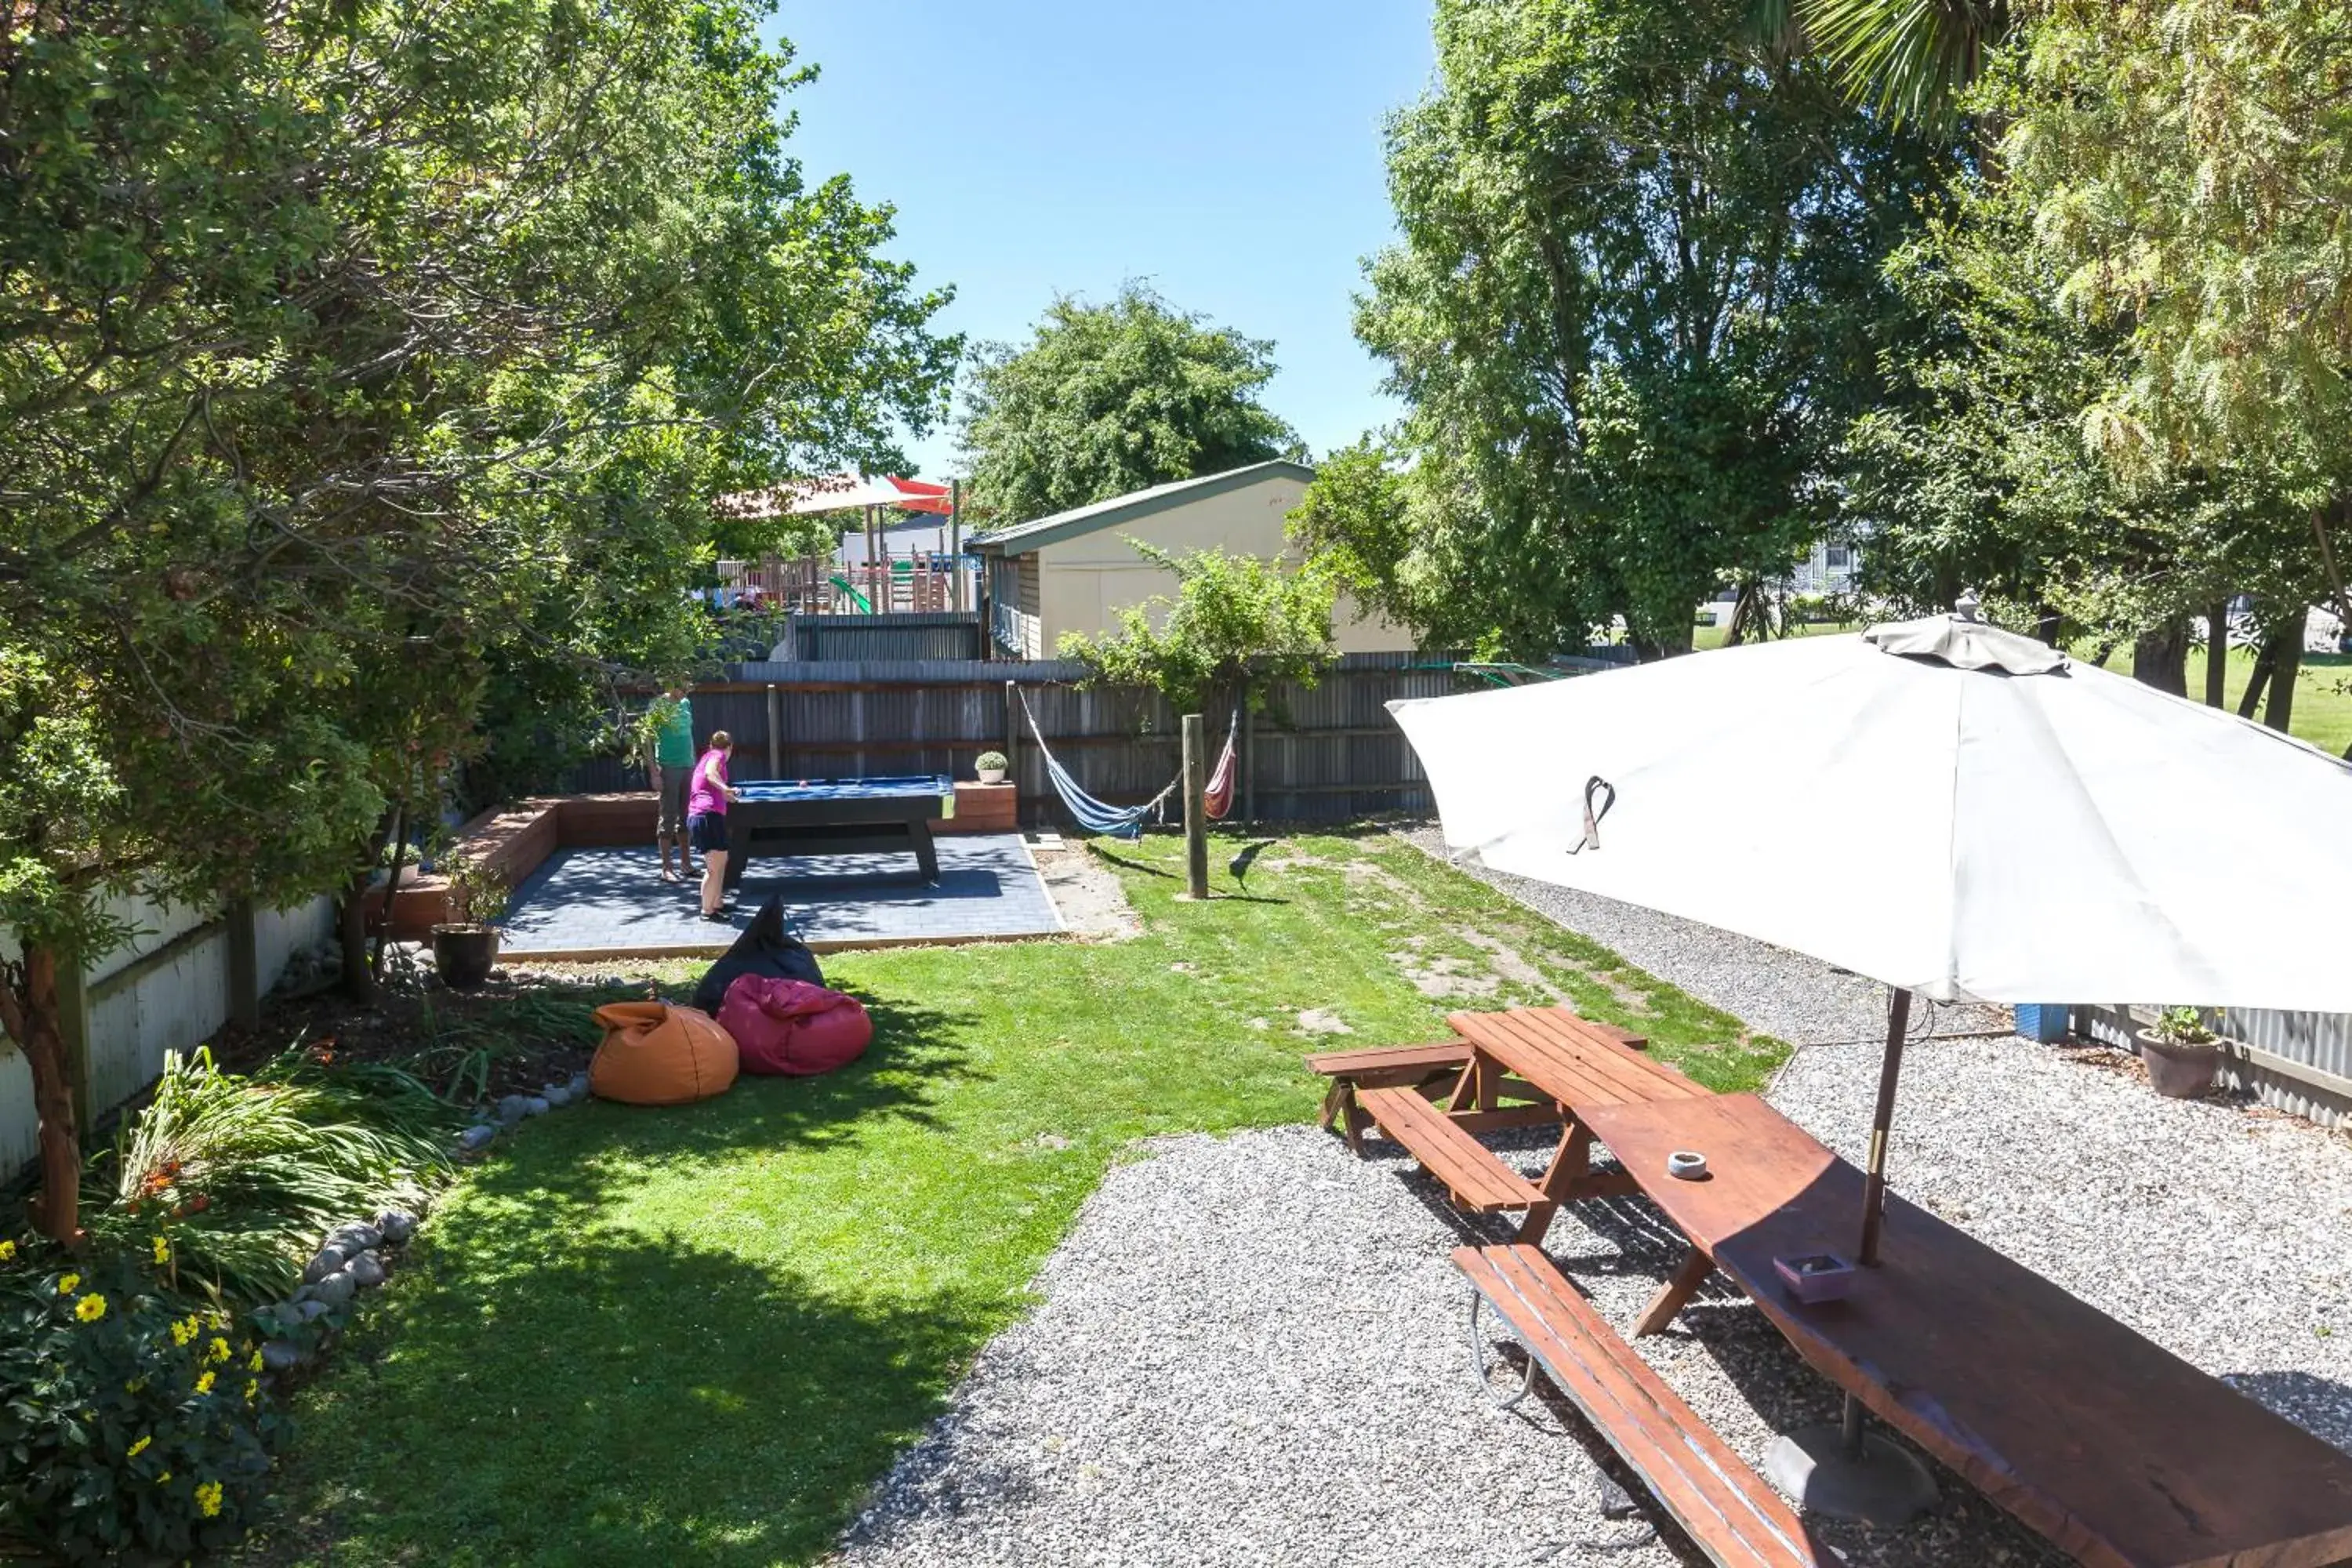 Garden, Children's Play Area in Around The World Backpackers